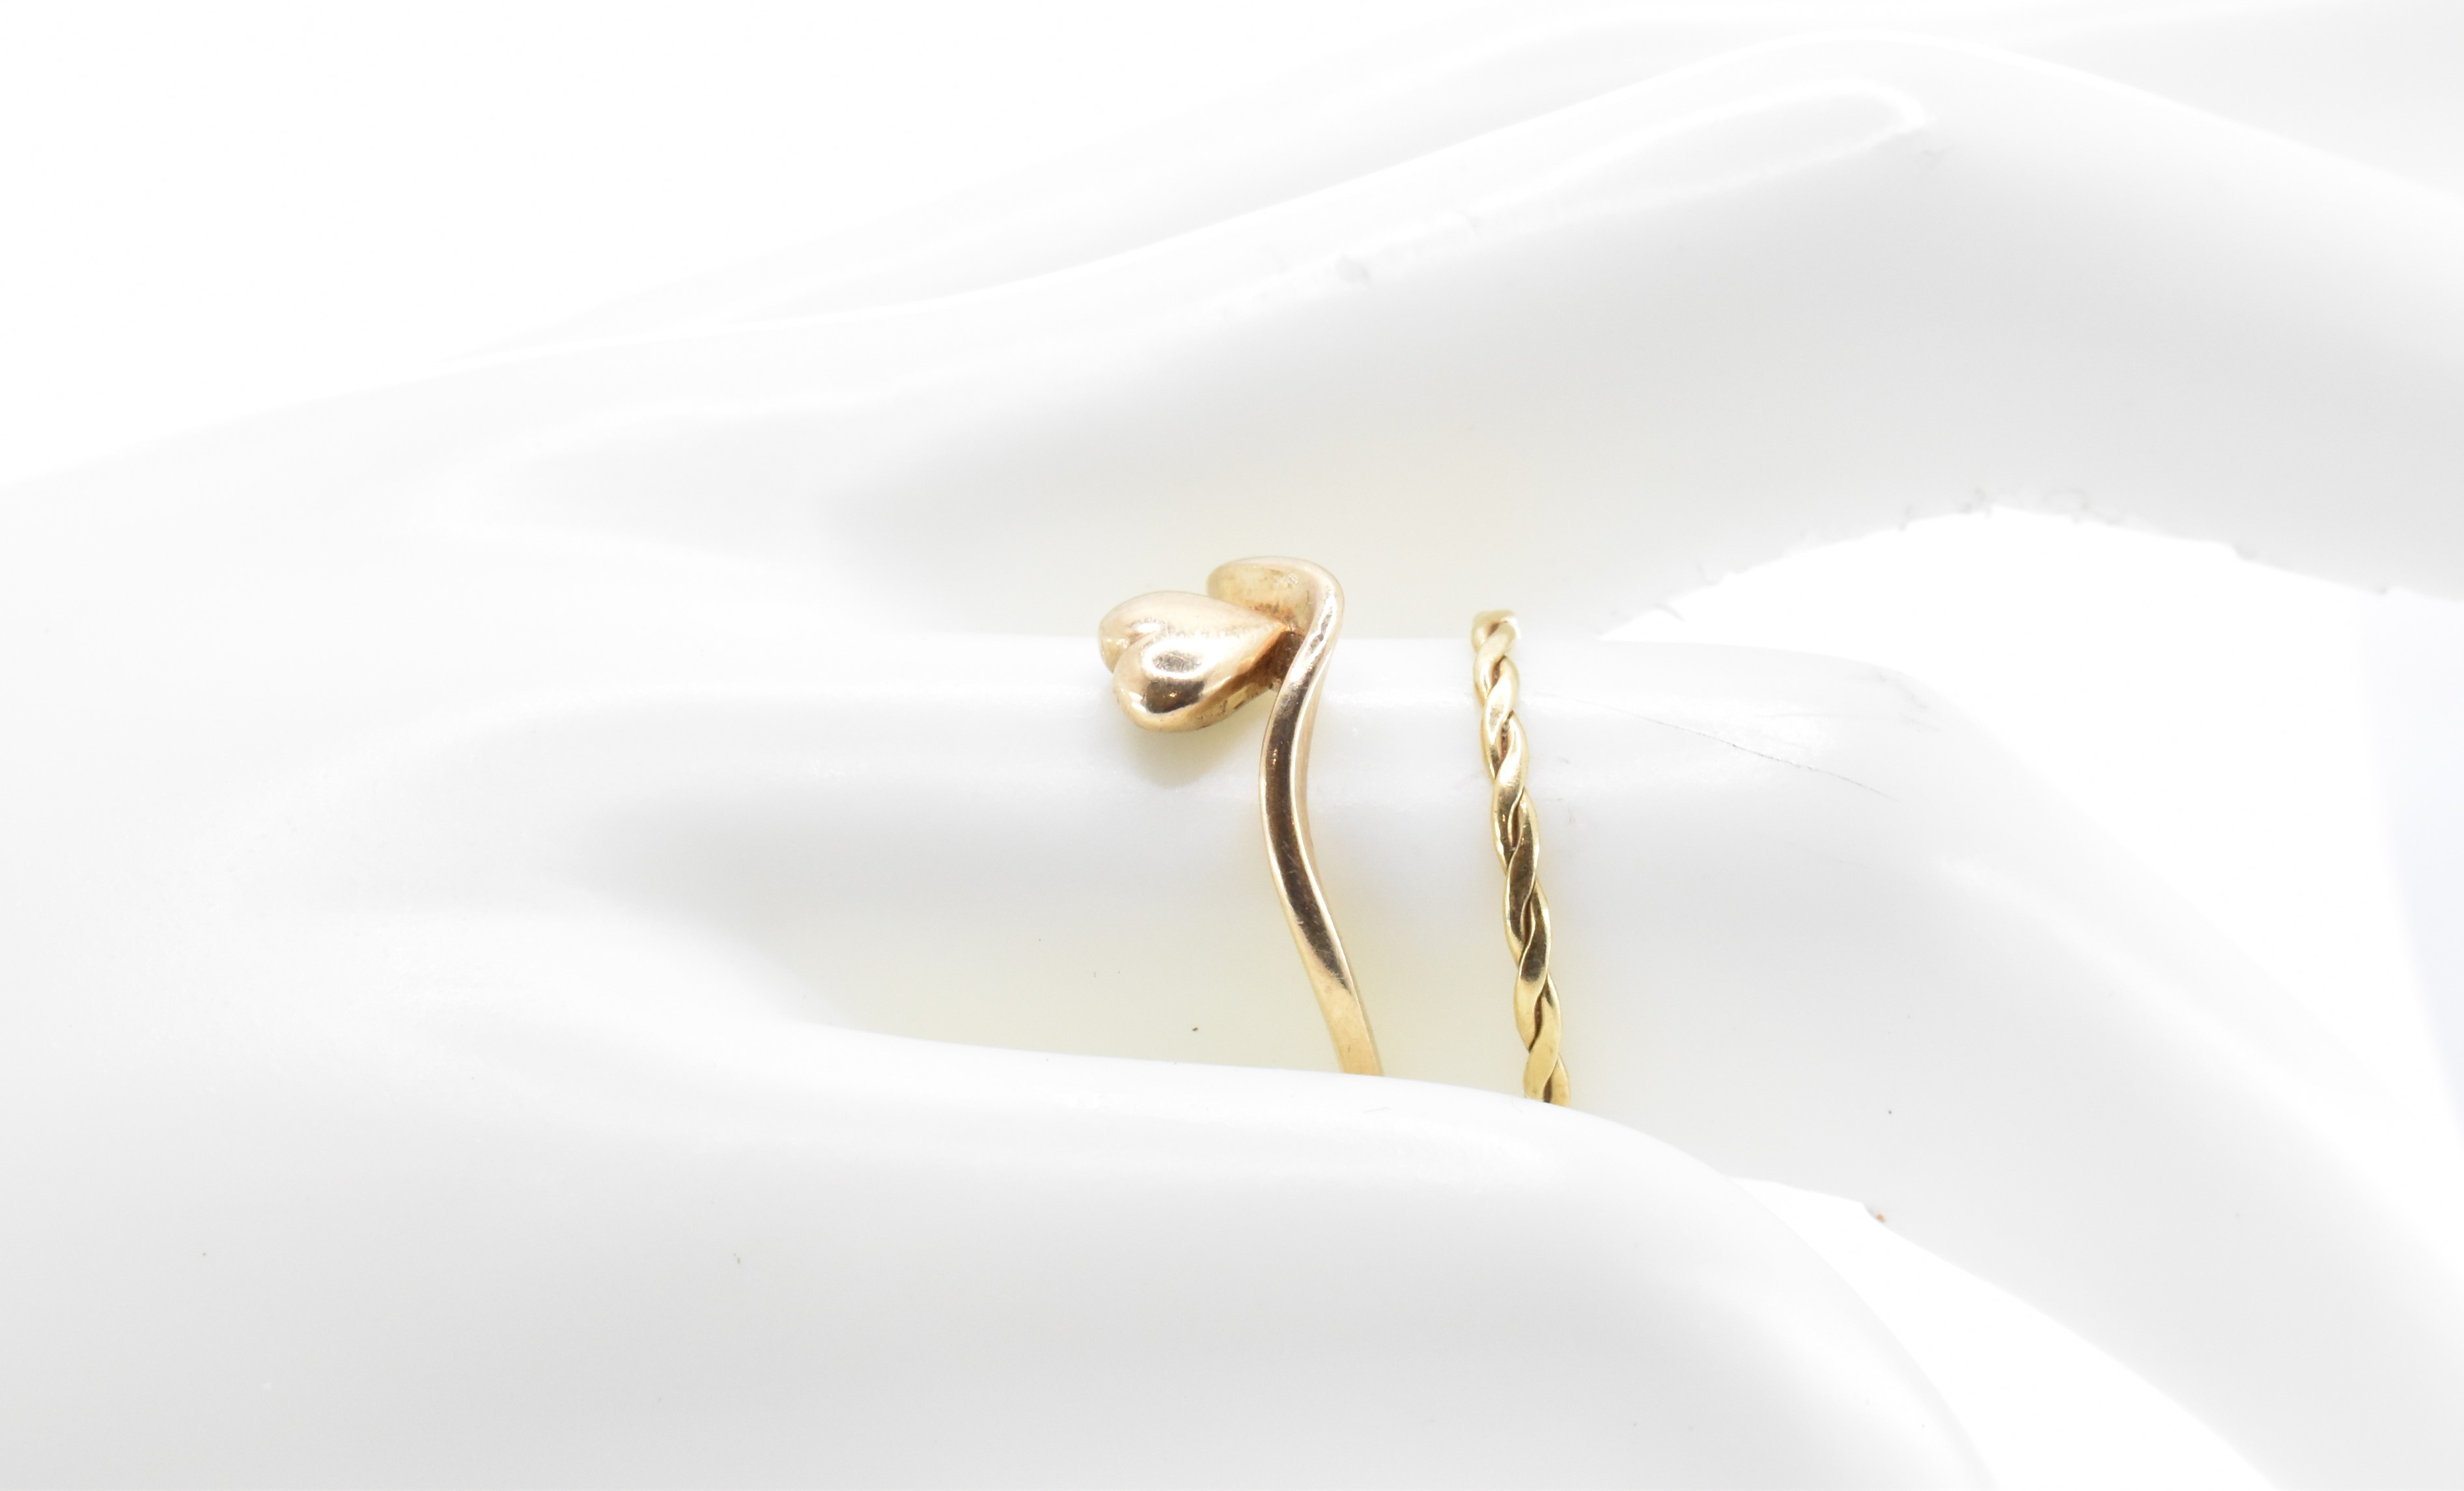 9CT GOLD HEART RING & 14CT GOLD ROPE TWIST RING - Image 6 of 7